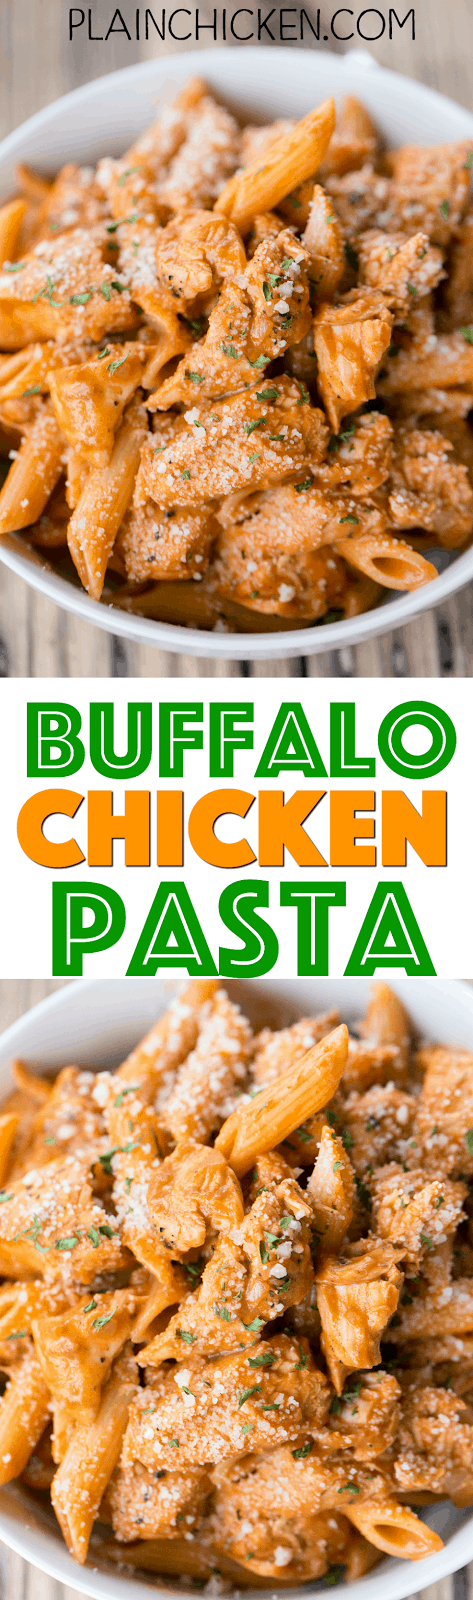 Buffalo Chicken Pasta - ready in under 20 minutes! SO simple and SO delicious! Great weeknight pasta recipe! Chicken and penne pasta tossed in tomato sauce, wing sauce, shallots, garlic, worcestershire and heavy cream. Top with some grated Parmesan cheese. Everyone cleaned their plates!